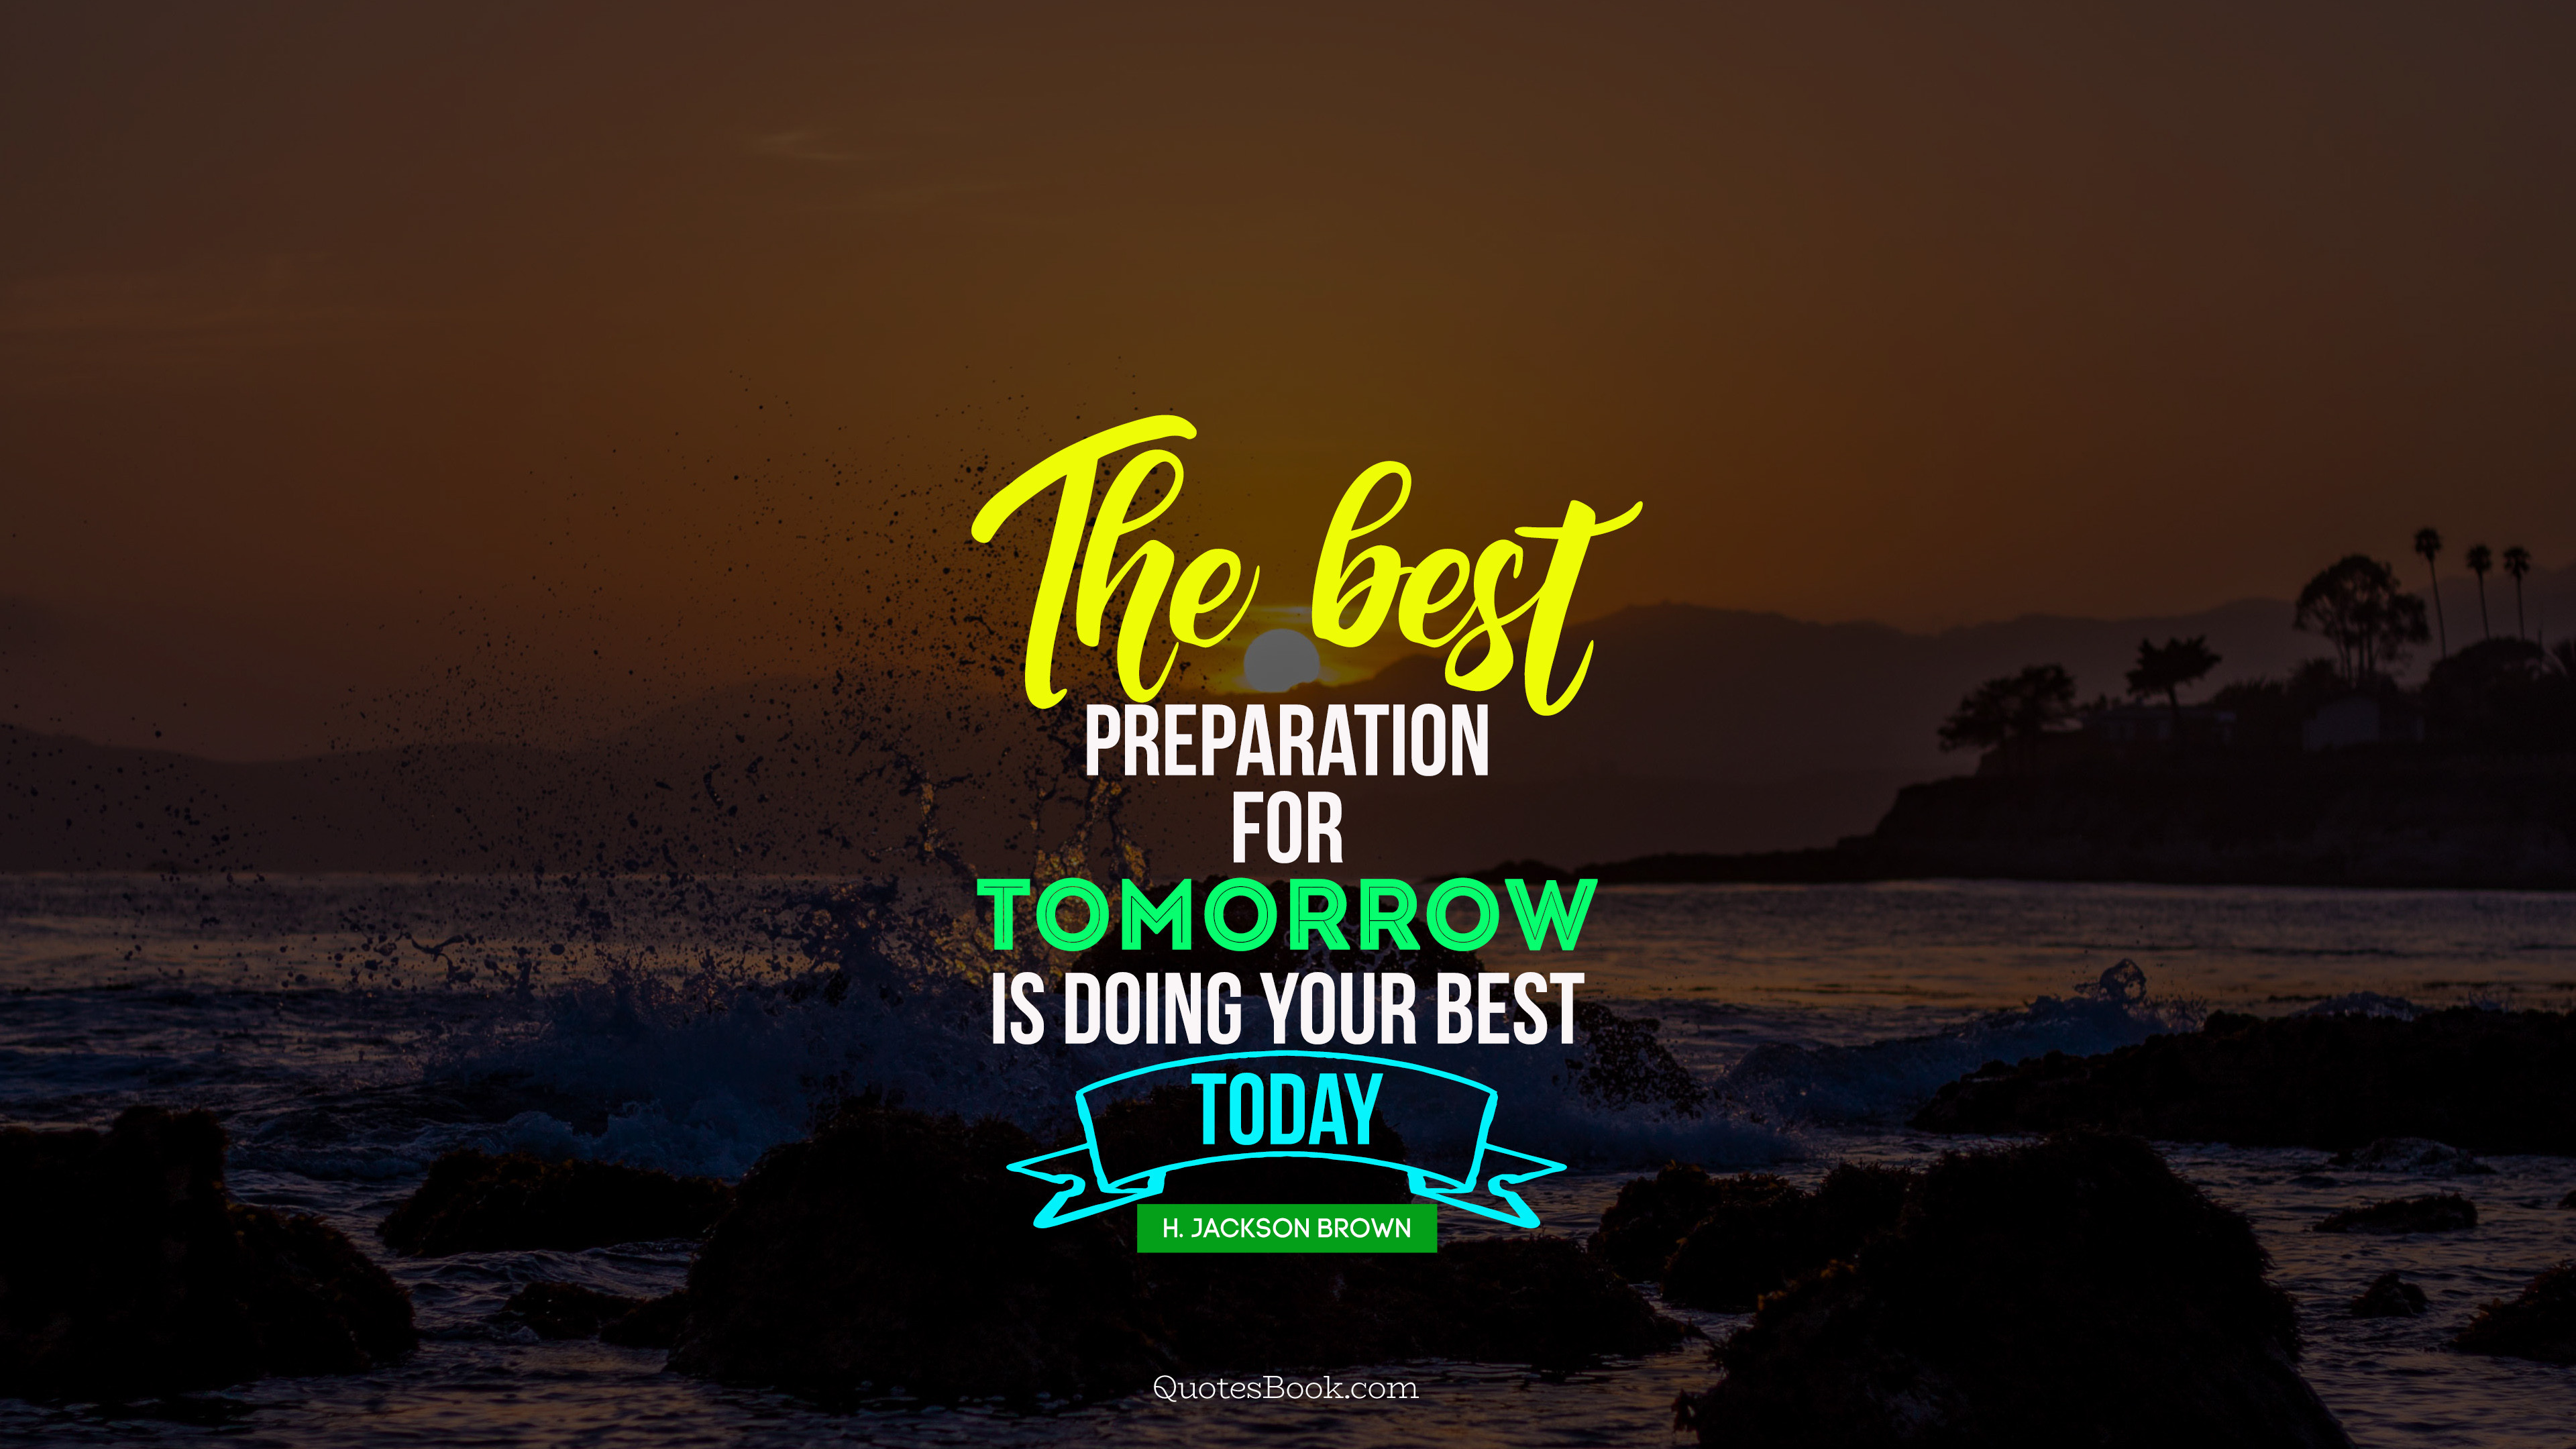 The best preparation for tomorrow is doing your best today. - Quote by